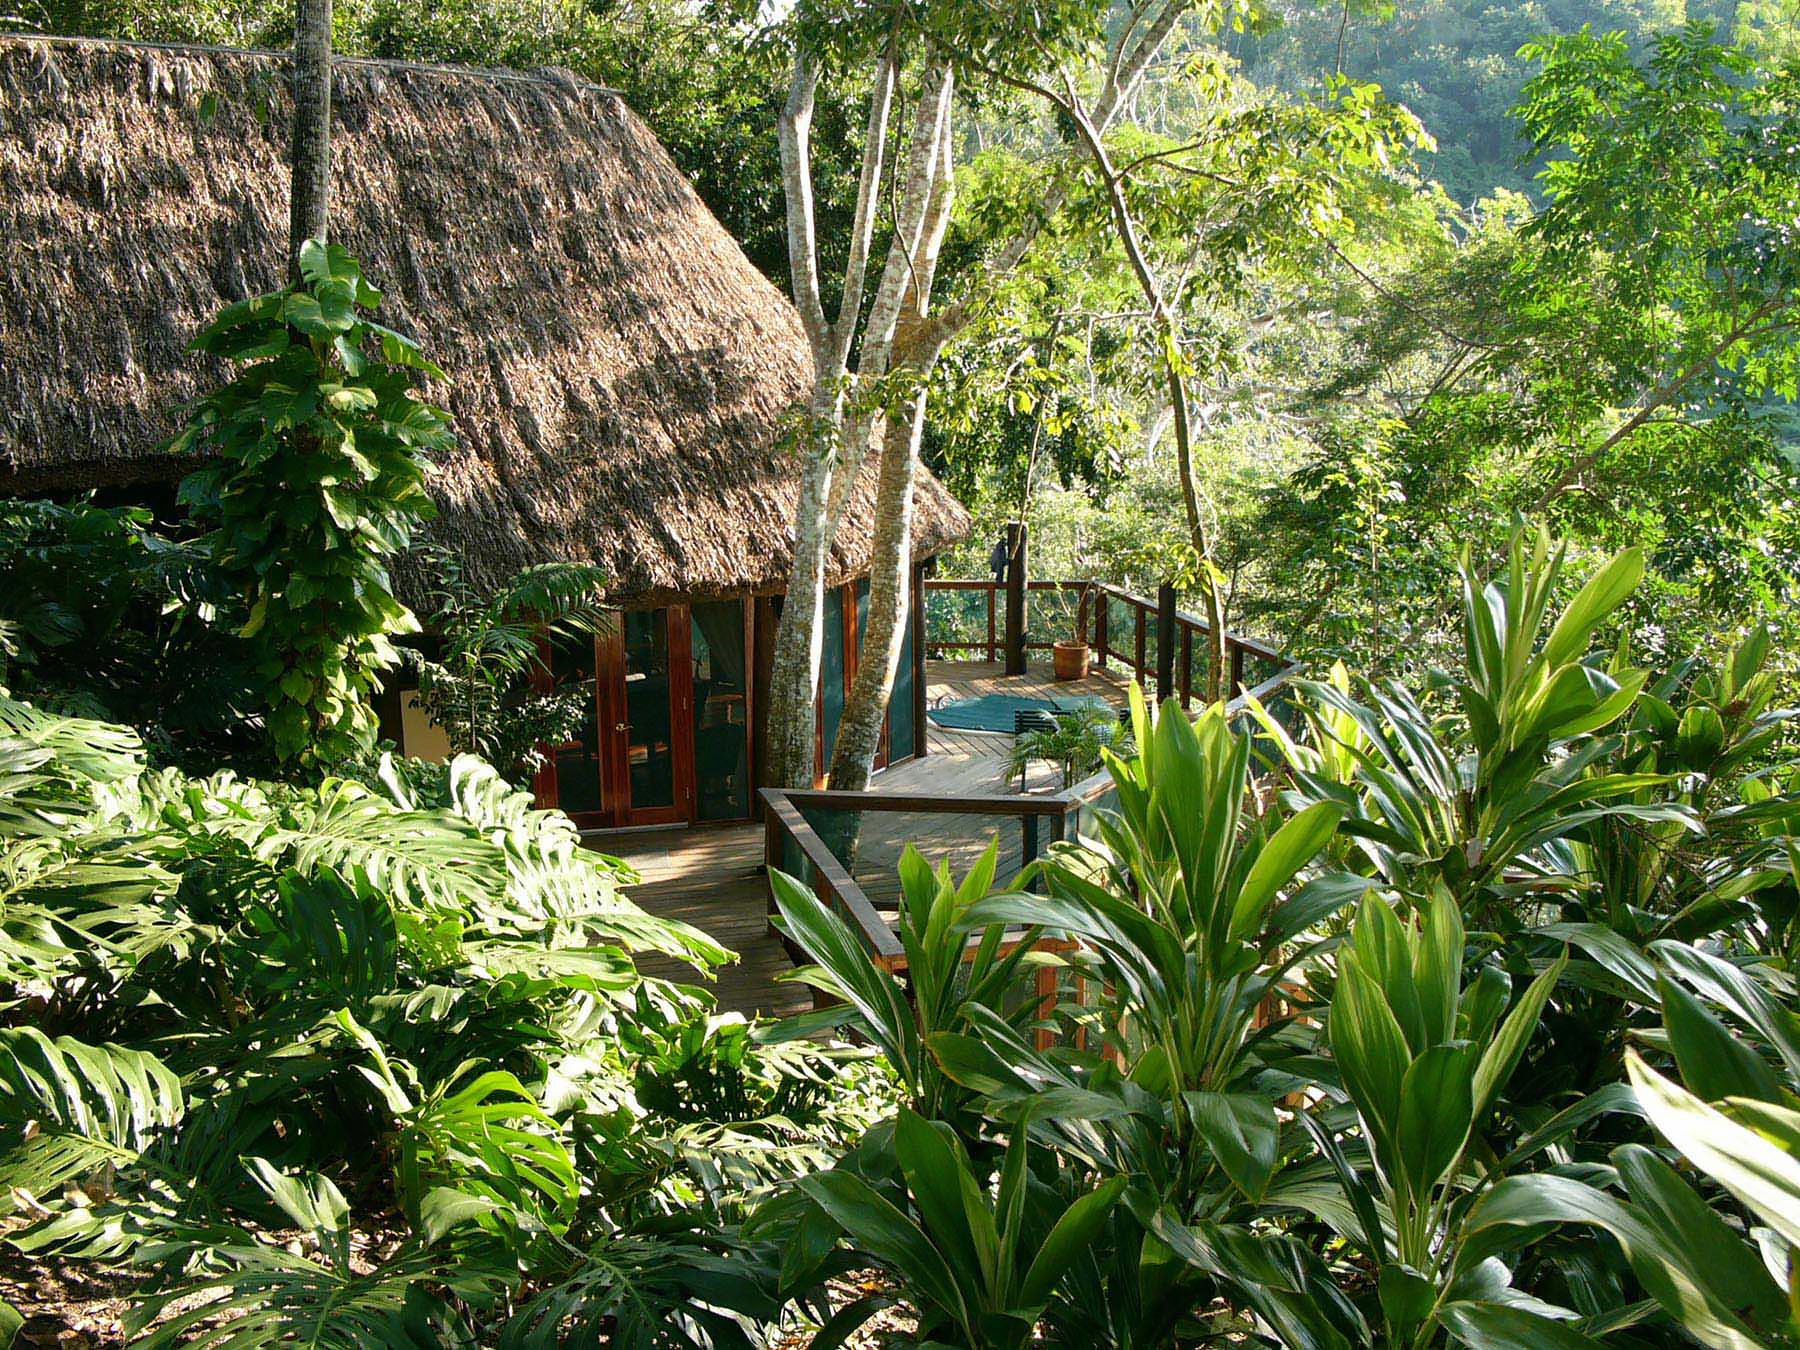 The Lodge at Chaa Creek - Guatemala & Belize for the Family